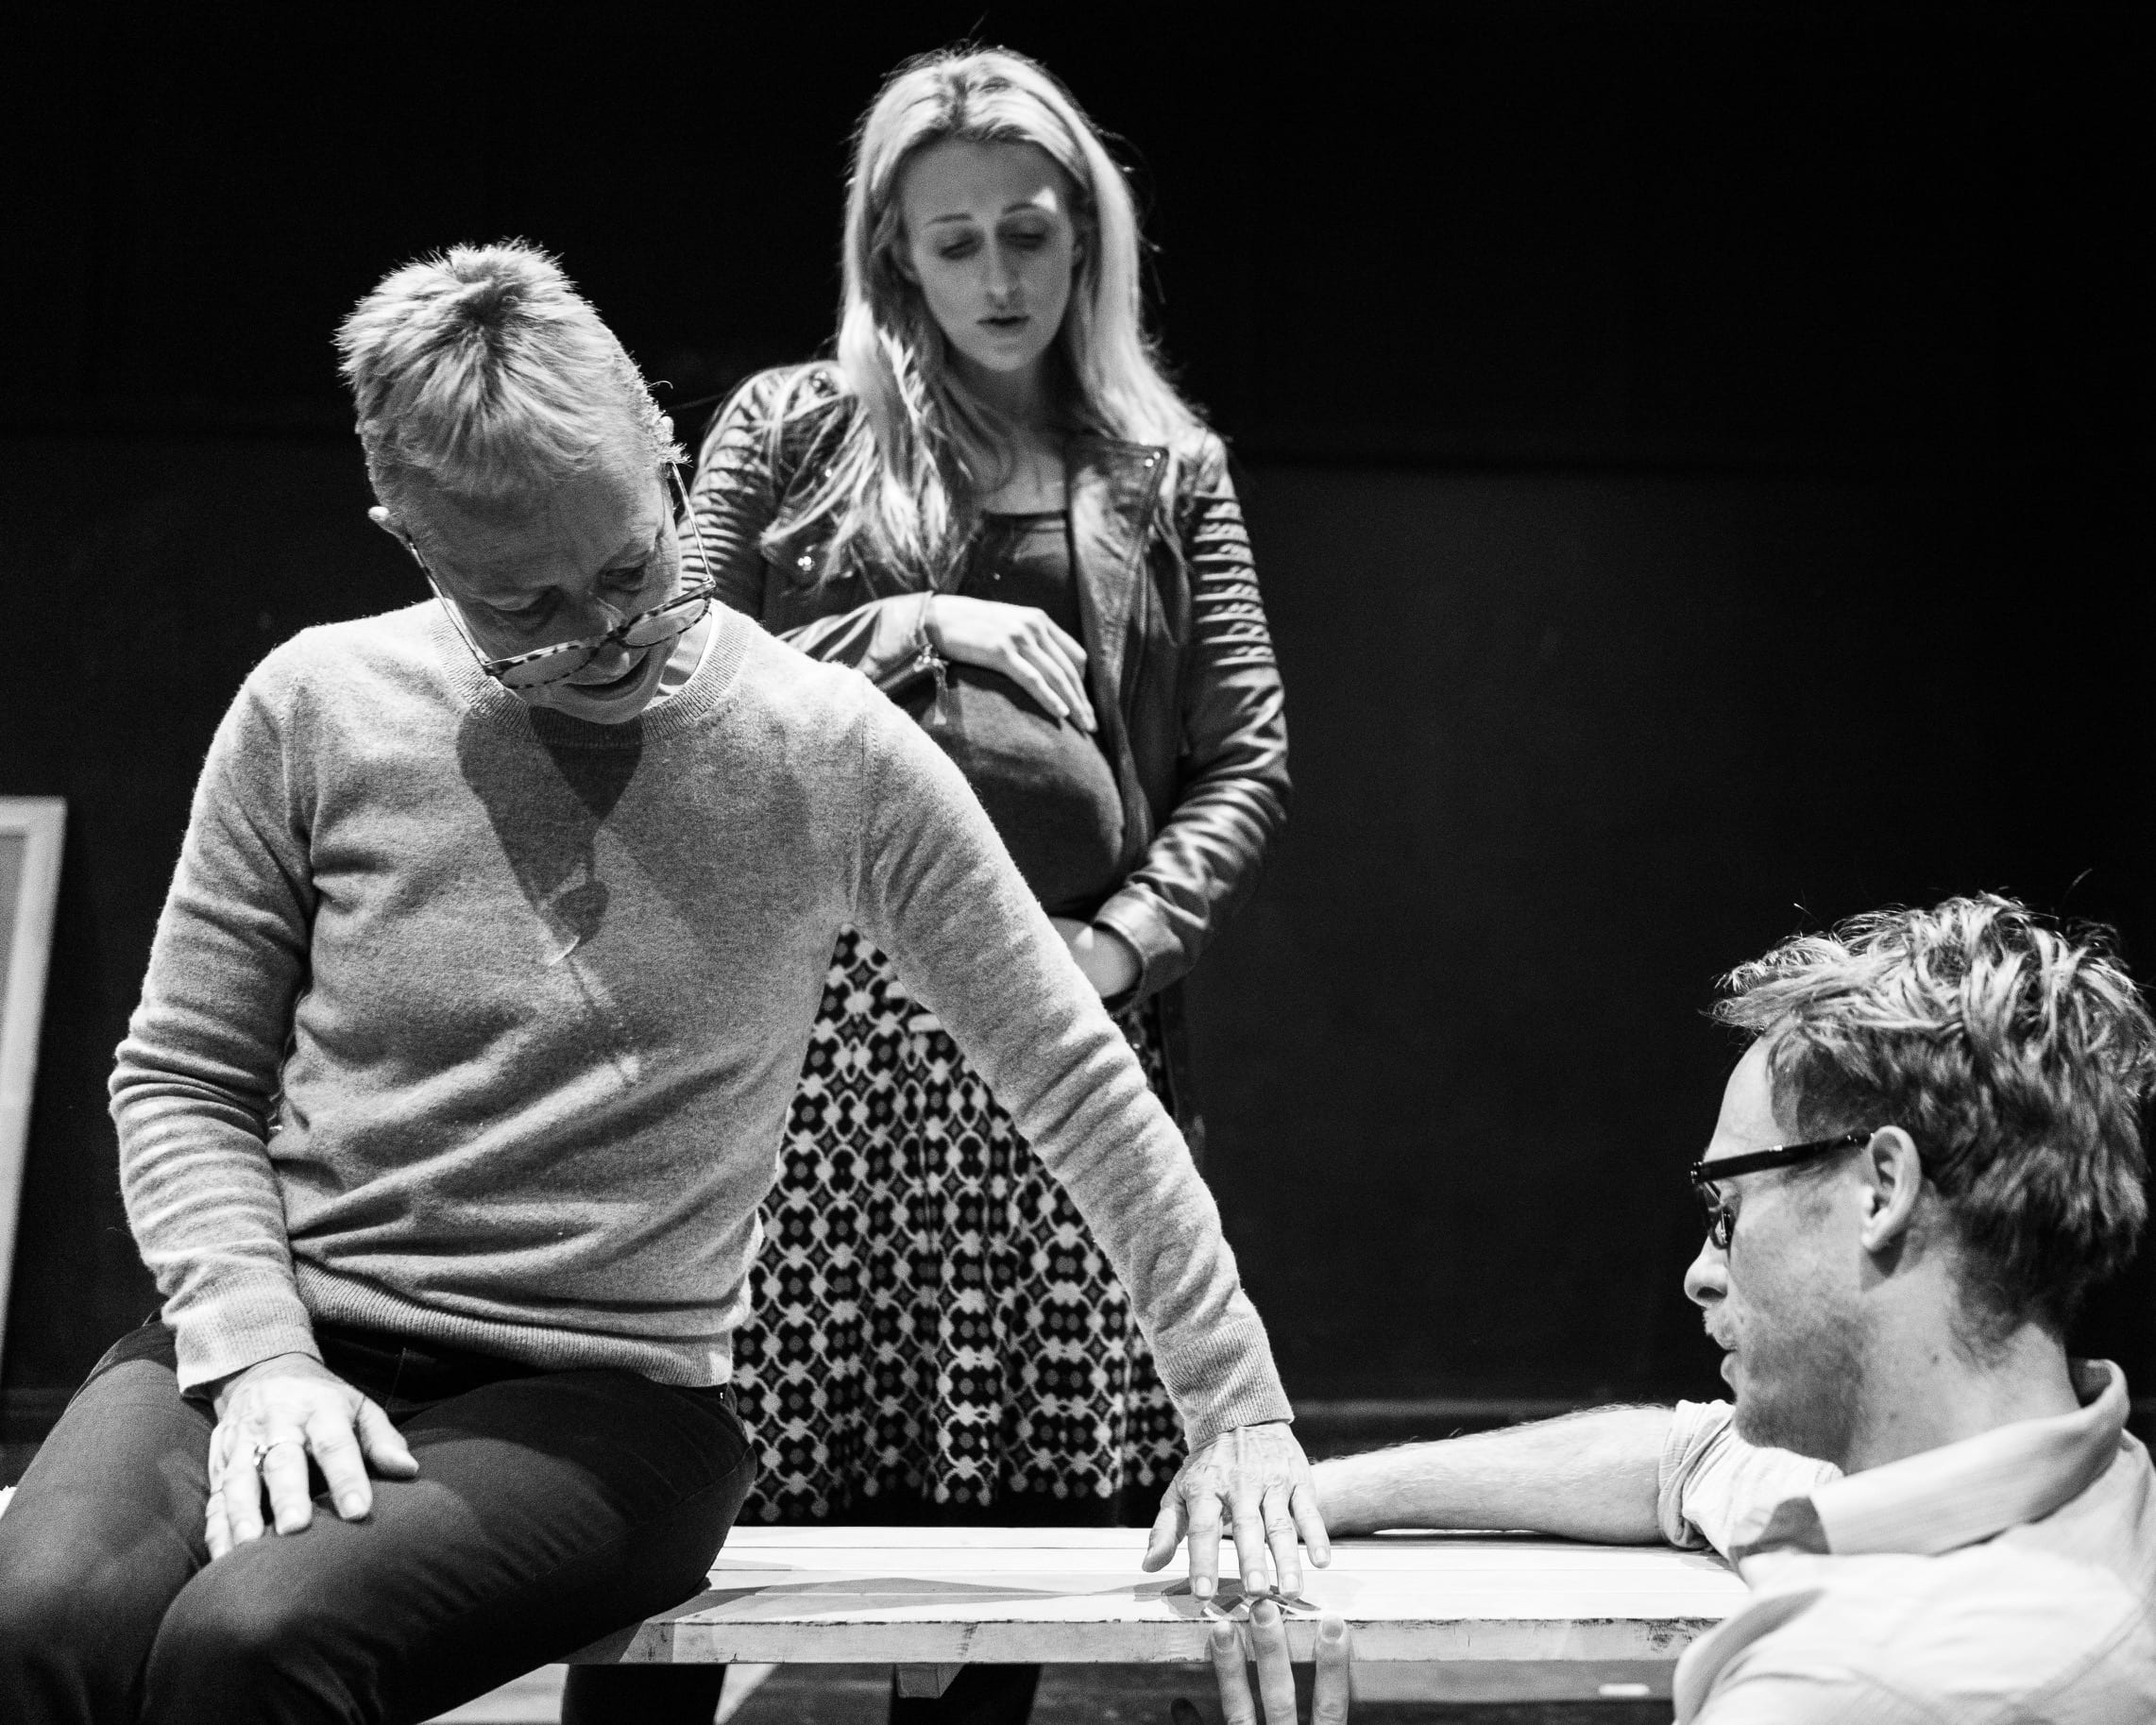 Rehearsal time with Director Tanya Gerstle and members of Polygraph cast. Image supplied.